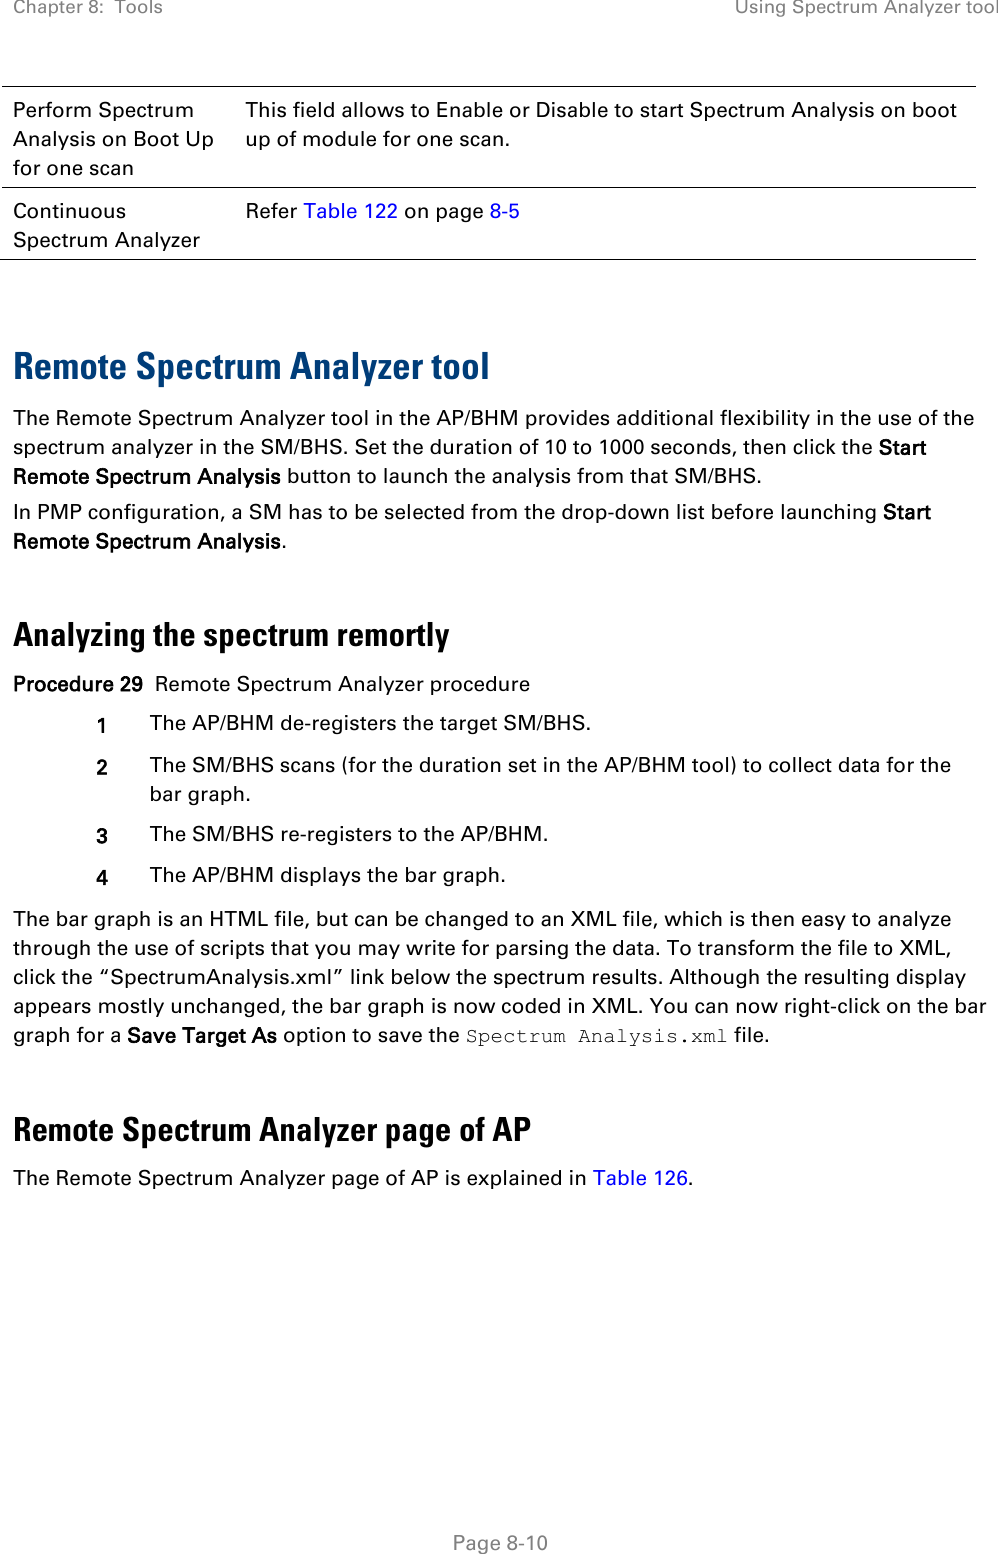 Chapter 8:  Tools Using Spectrum Analyzer tool   Page 8-10 Perform Spectrum Analysis on Boot Up for one scan This field allows to Enable or Disable to start Spectrum Analysis on boot up of module for one scan. Continuous Spectrum Analyzer Refer Table 122 on page 8-5   Remote Spectrum Analyzer tool  The Remote Spectrum Analyzer tool in the AP/BHM provides additional flexibility in the use of the spectrum analyzer in the SM/BHS. Set the duration of 10 to 1000 seconds, then click the Start Remote Spectrum Analysis button to launch the analysis from that SM/BHS.  In PMP configuration, a SM has to be selected from the drop-down list before launching Start Remote Spectrum Analysis.  Analyzing the spectrum remortly Procedure 29  Remote Spectrum Analyzer procedure 1 The AP/BHM de-registers the target SM/BHS. 2 The SM/BHS scans (for the duration set in the AP/BHM tool) to collect data for the bar graph. 3 The SM/BHS re-registers to the AP/BHM. 4 The AP/BHM displays the bar graph. The bar graph is an HTML file, but can be changed to an XML file, which is then easy to analyze through the use of scripts that you may write for parsing the data. To transform the file to XML, click the “SpectrumAnalysis.xml” link below the spectrum results. Although the resulting display appears mostly unchanged, the bar graph is now coded in XML. You can now right-click on the bar graph for a Save Target As option to save the Spectrum Analysis.xml file.  Remote Spectrum Analyzer page of AP The Remote Spectrum Analyzer page of AP is explained in Table 126. 